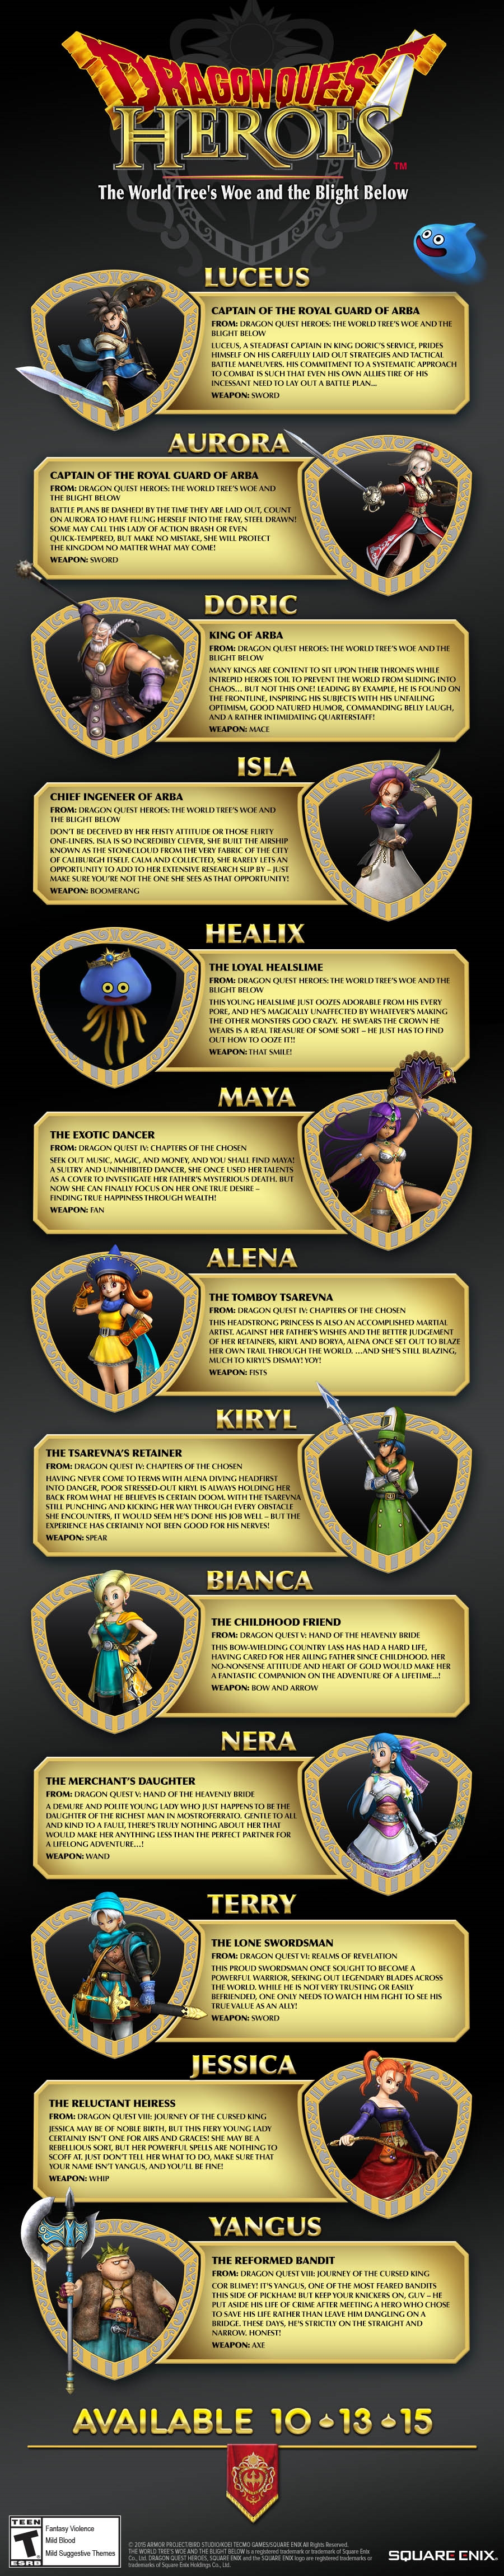 Character Details Revealed for Dragon Quest Heroes Infographic